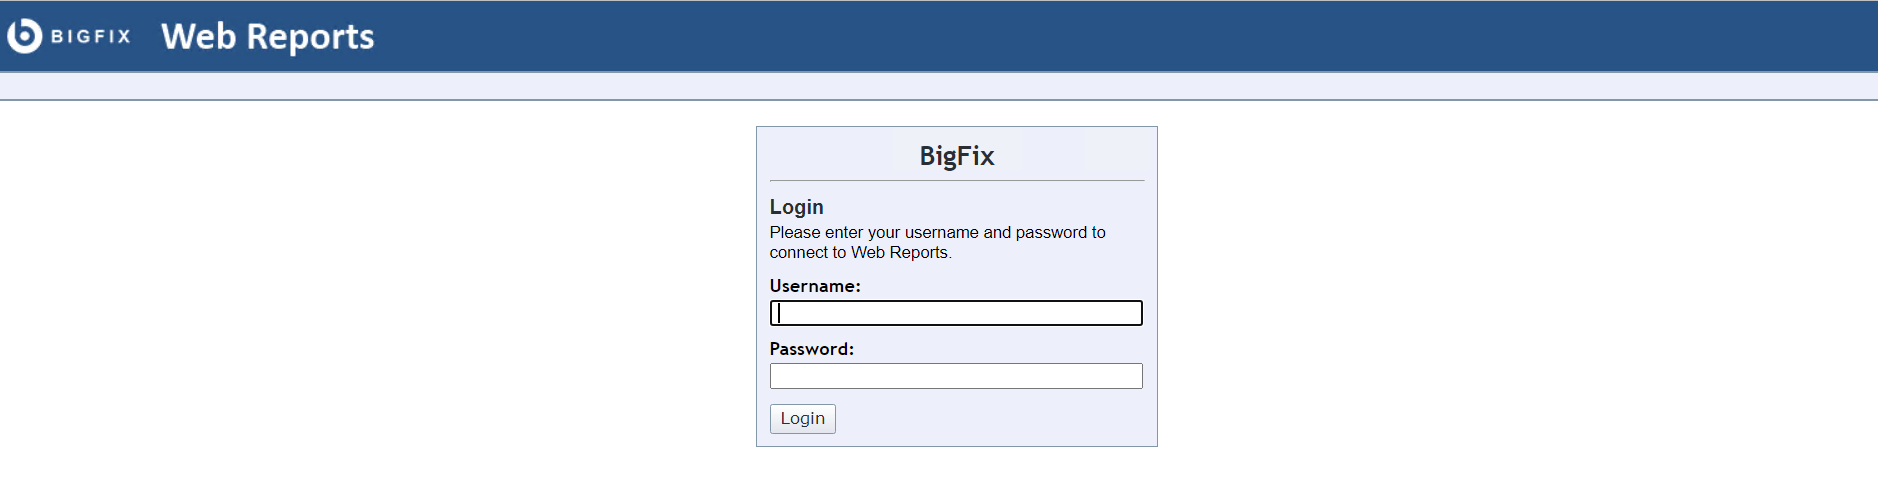 Entering the Web Reports username and password and clicking Login